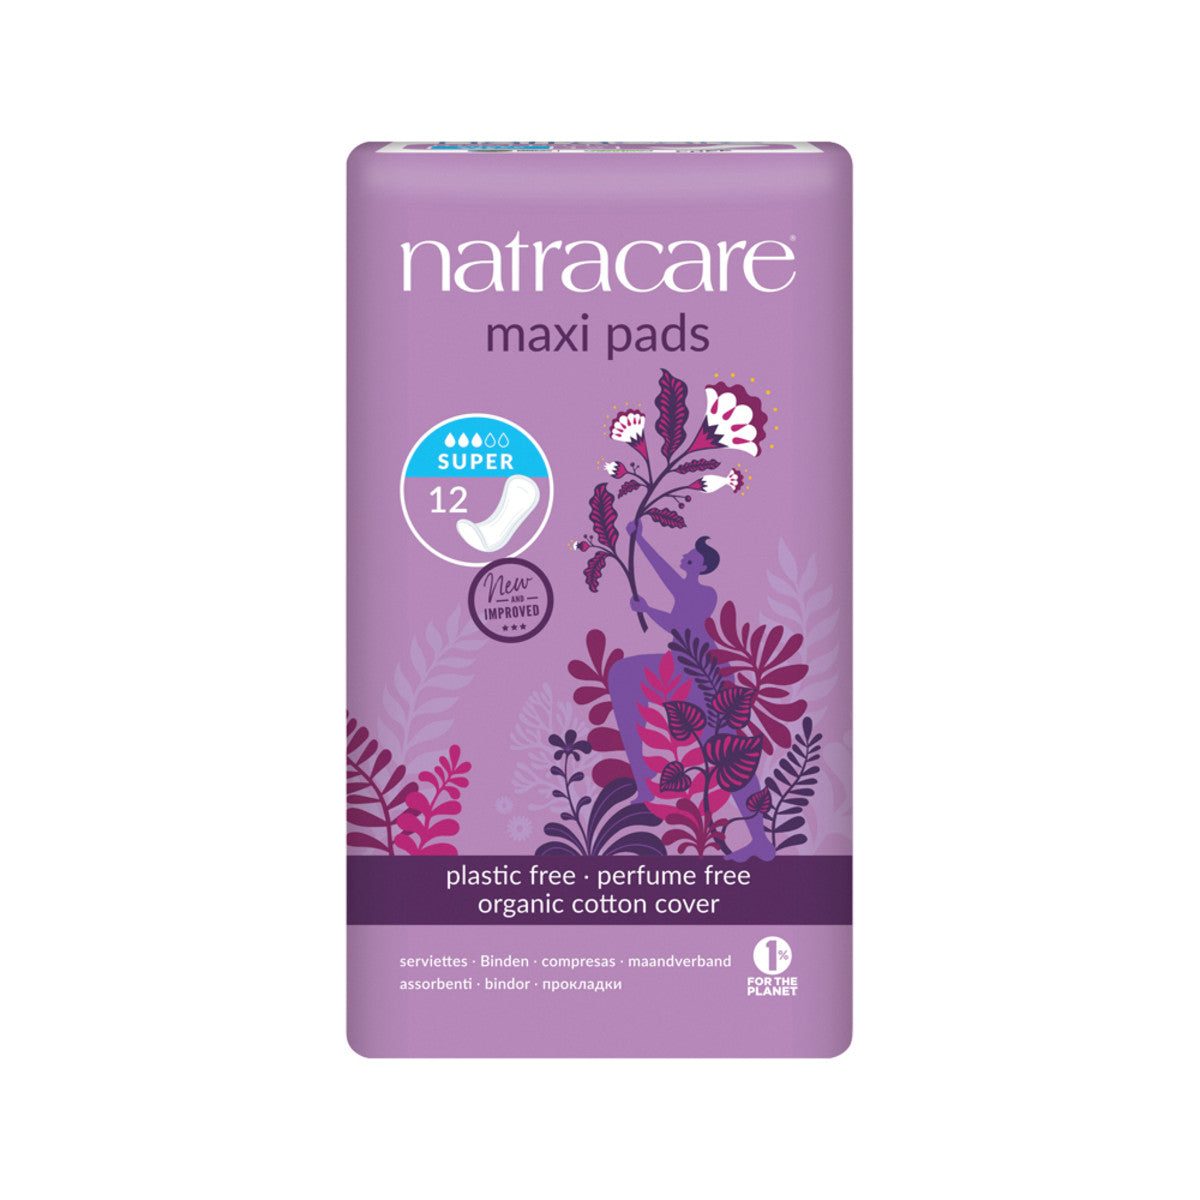 Natracare - Maxi Pads Super with Organic Cotton Cover